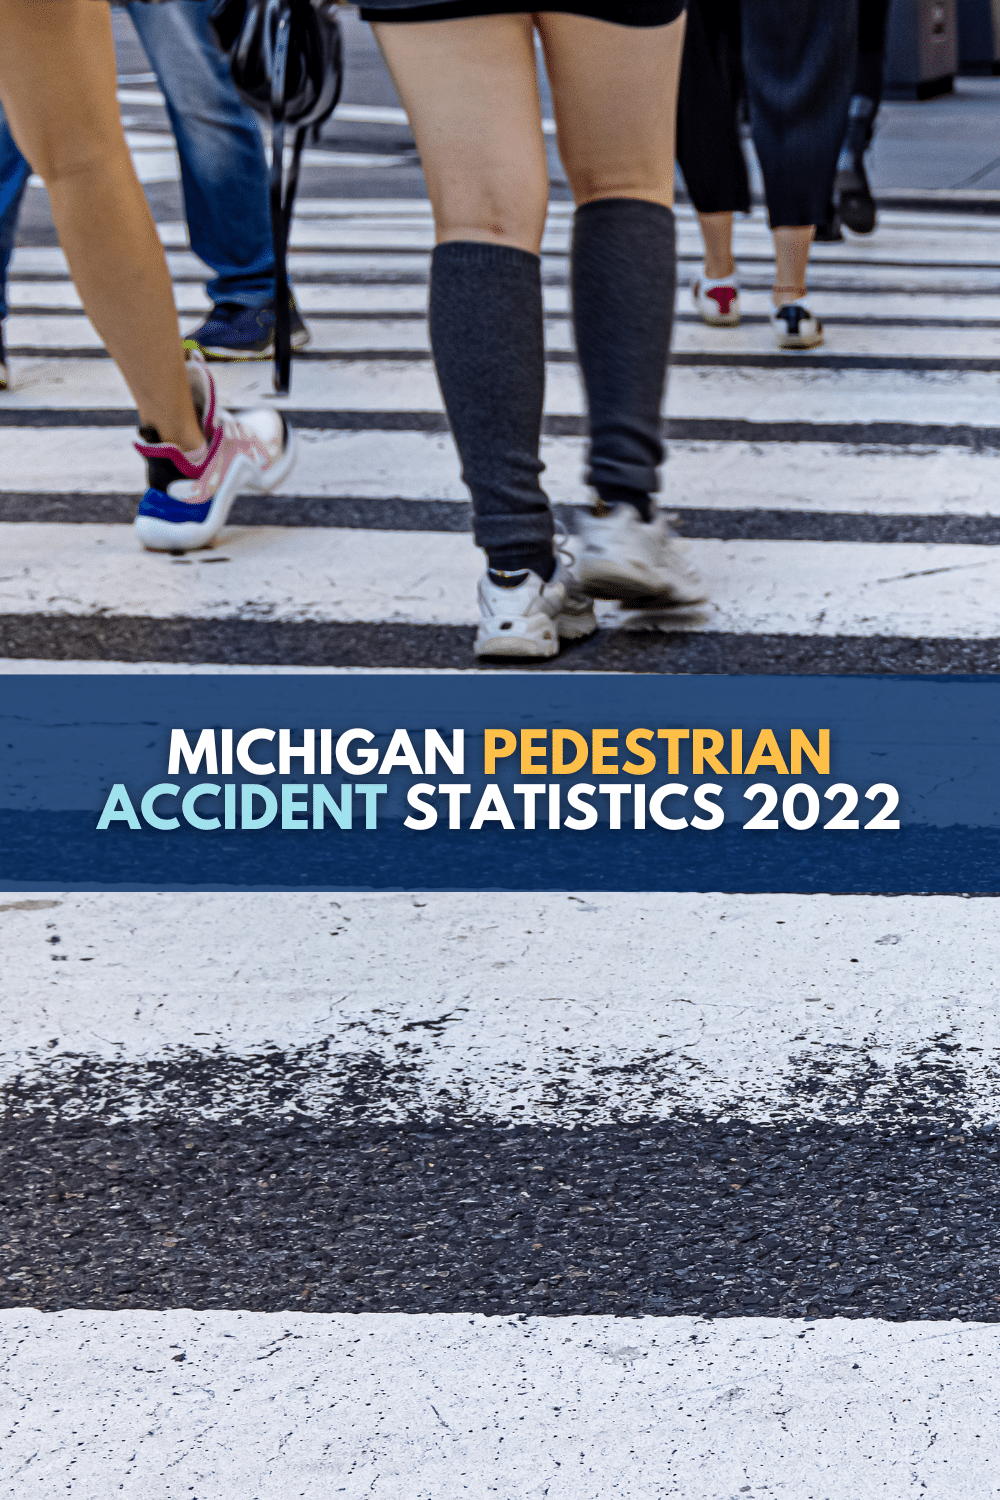 Michigan Pedestrian Accident Statistics 2022: Here’s What To Know